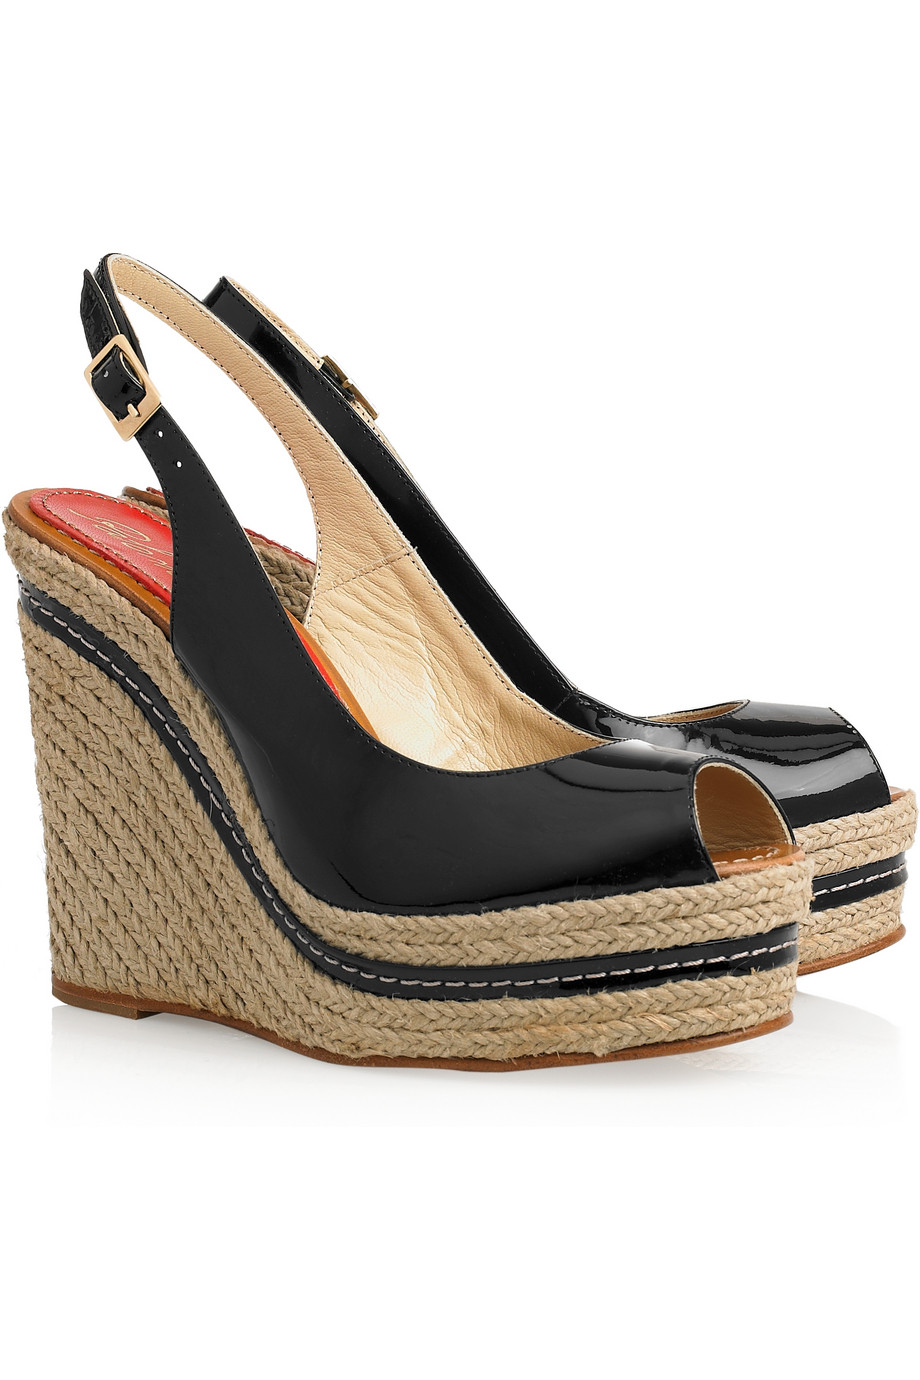 Paloma Barceló Lucy Patent-leather Espadrille Wedges in Black | Lyst